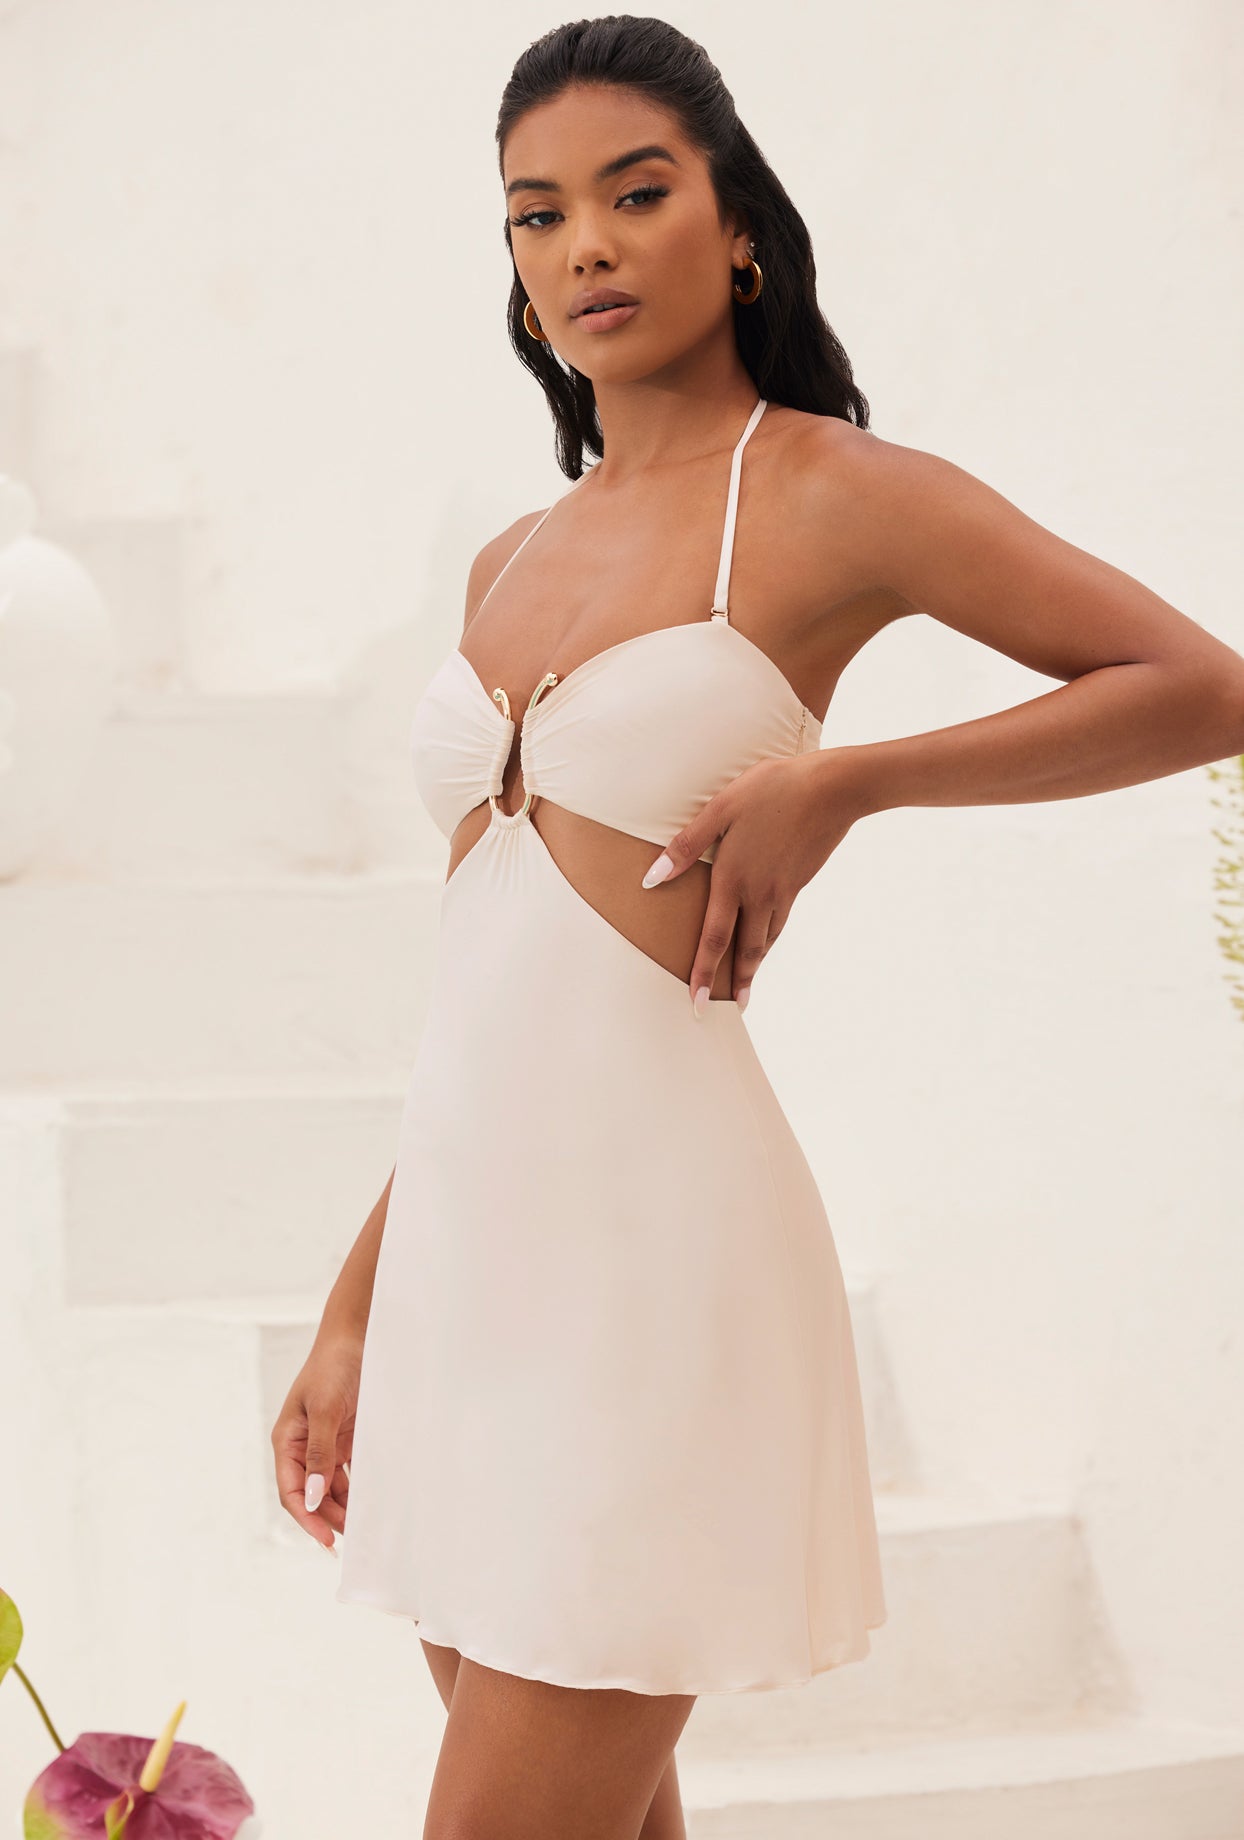 Bandeau Cut Out A-Line Mini Dress in Ivory